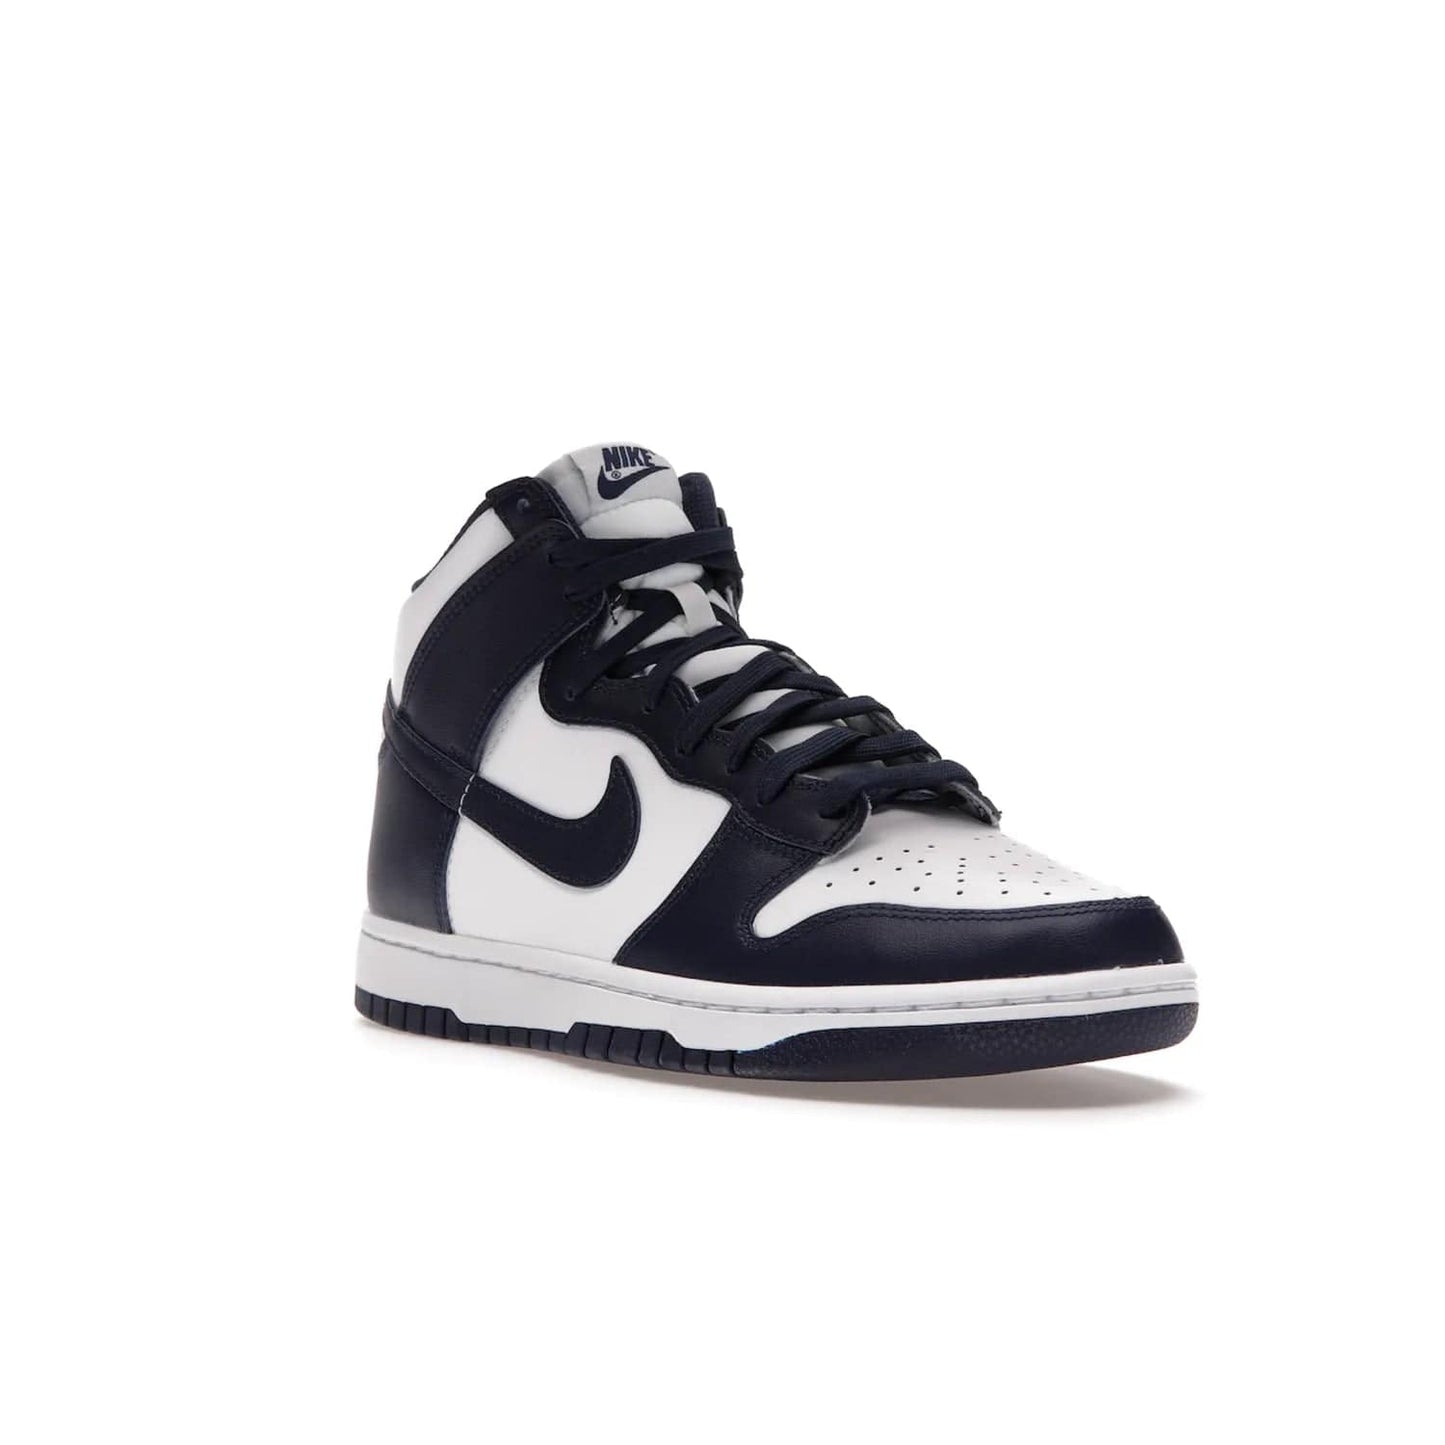 Nike Dunk High Championship Navy - Image 6 - Only at www.BallersClubKickz.com - Classic Nike Dunk High sneaker delivers an unforgettable style with white leather upper, Championship Navy overlays, and matching woven tongue label and sole. Make a statement with the Championship Navy today.